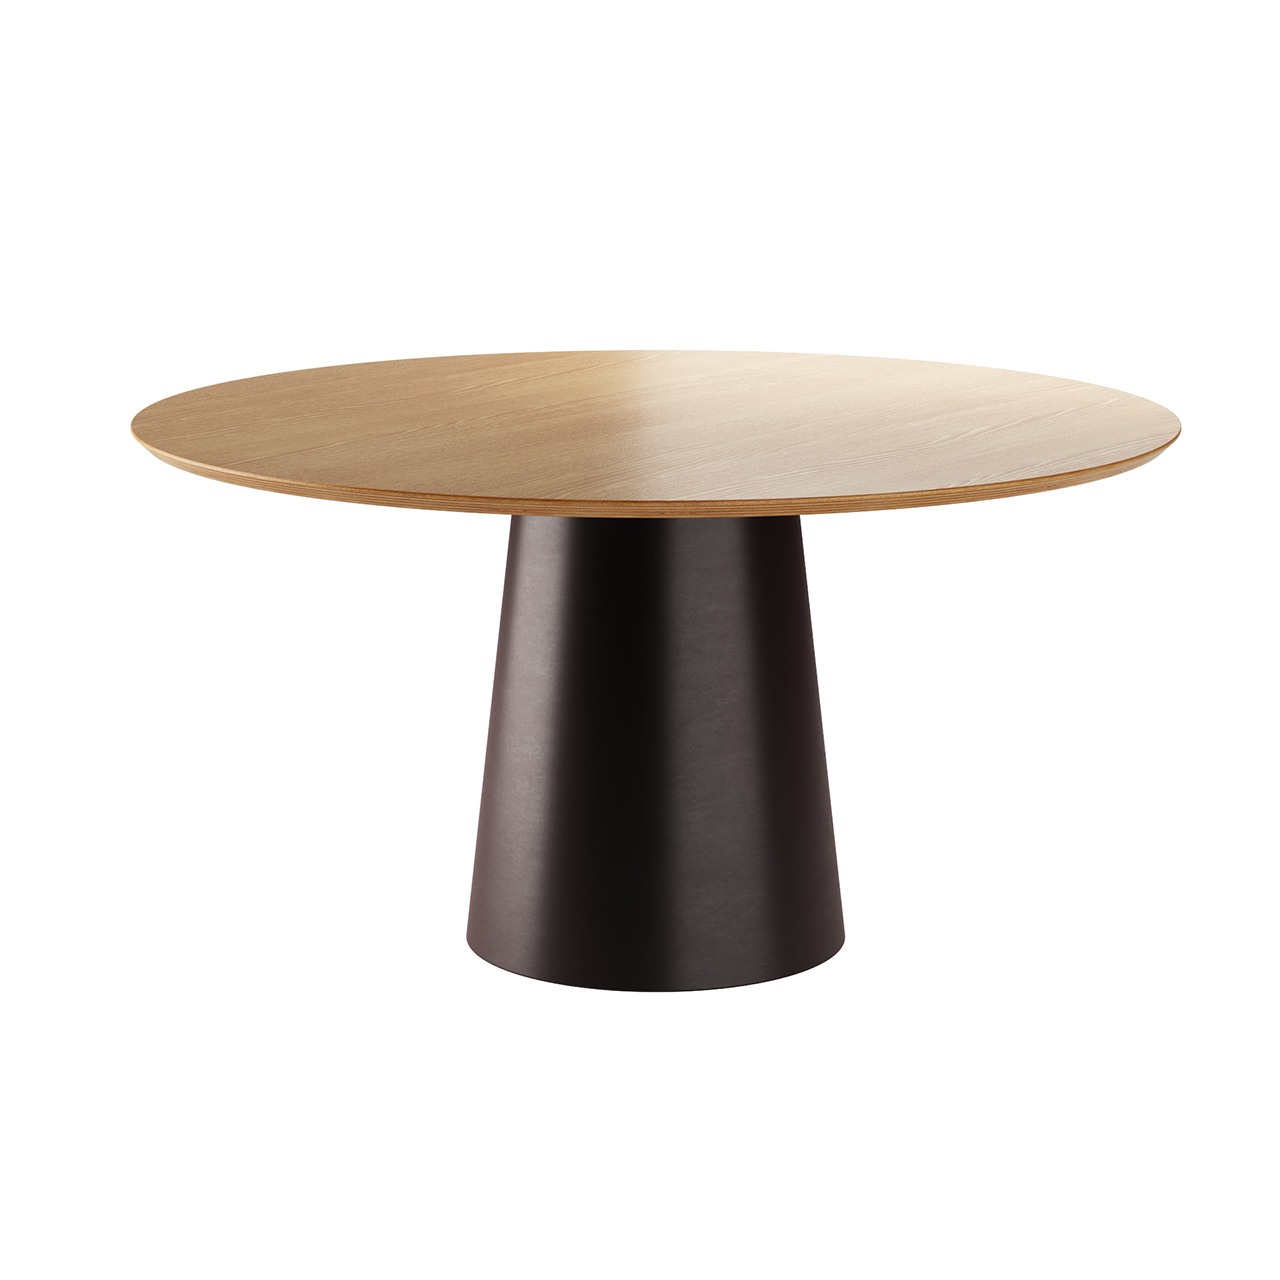 totem-round-table-by-sovet.jpg